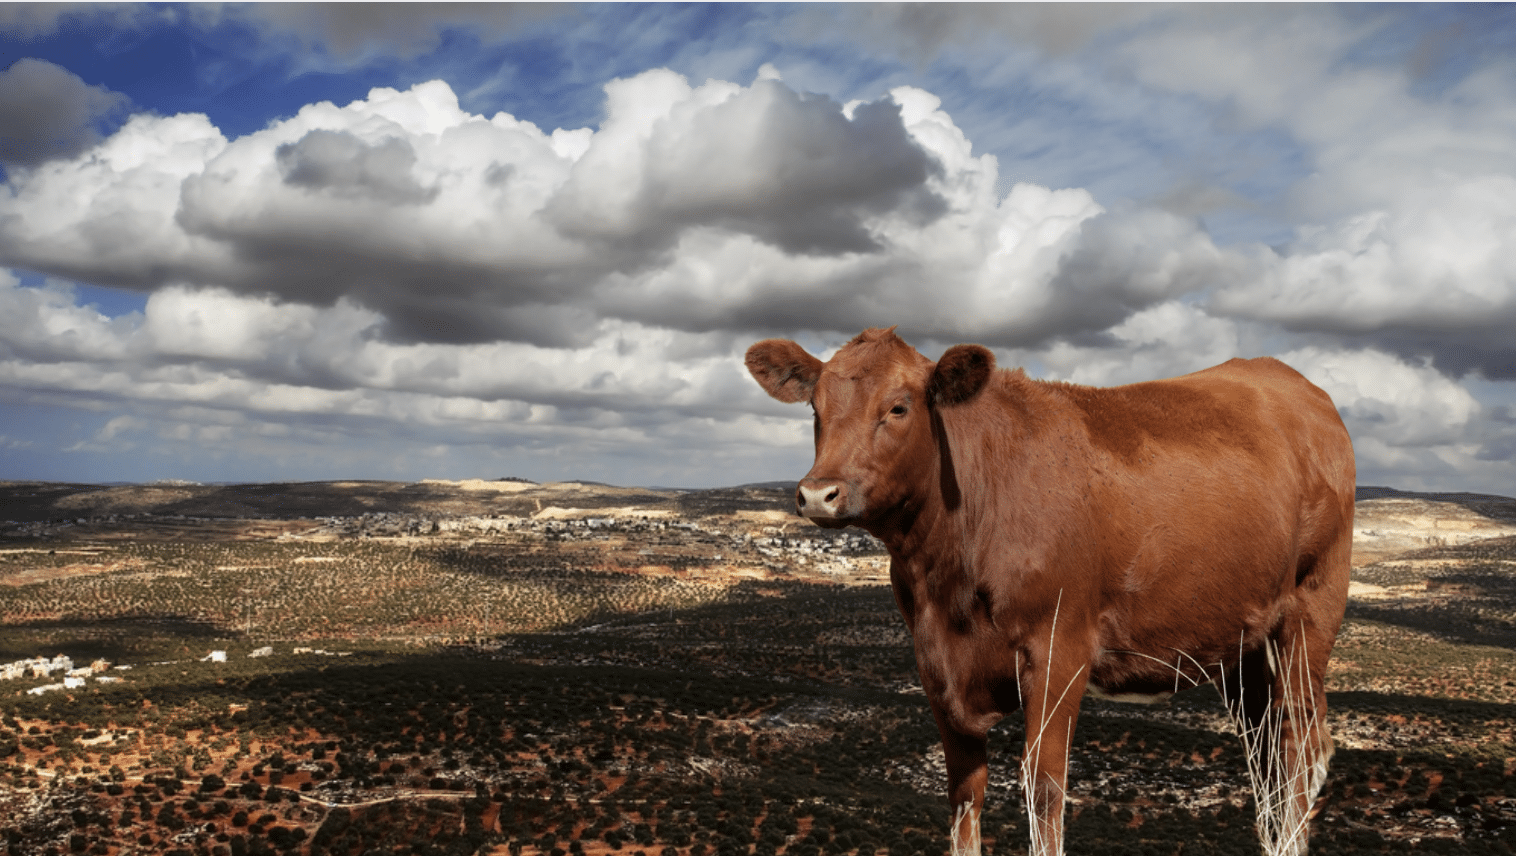 Millions could soon flock to Samaria to see Biblical red heifer